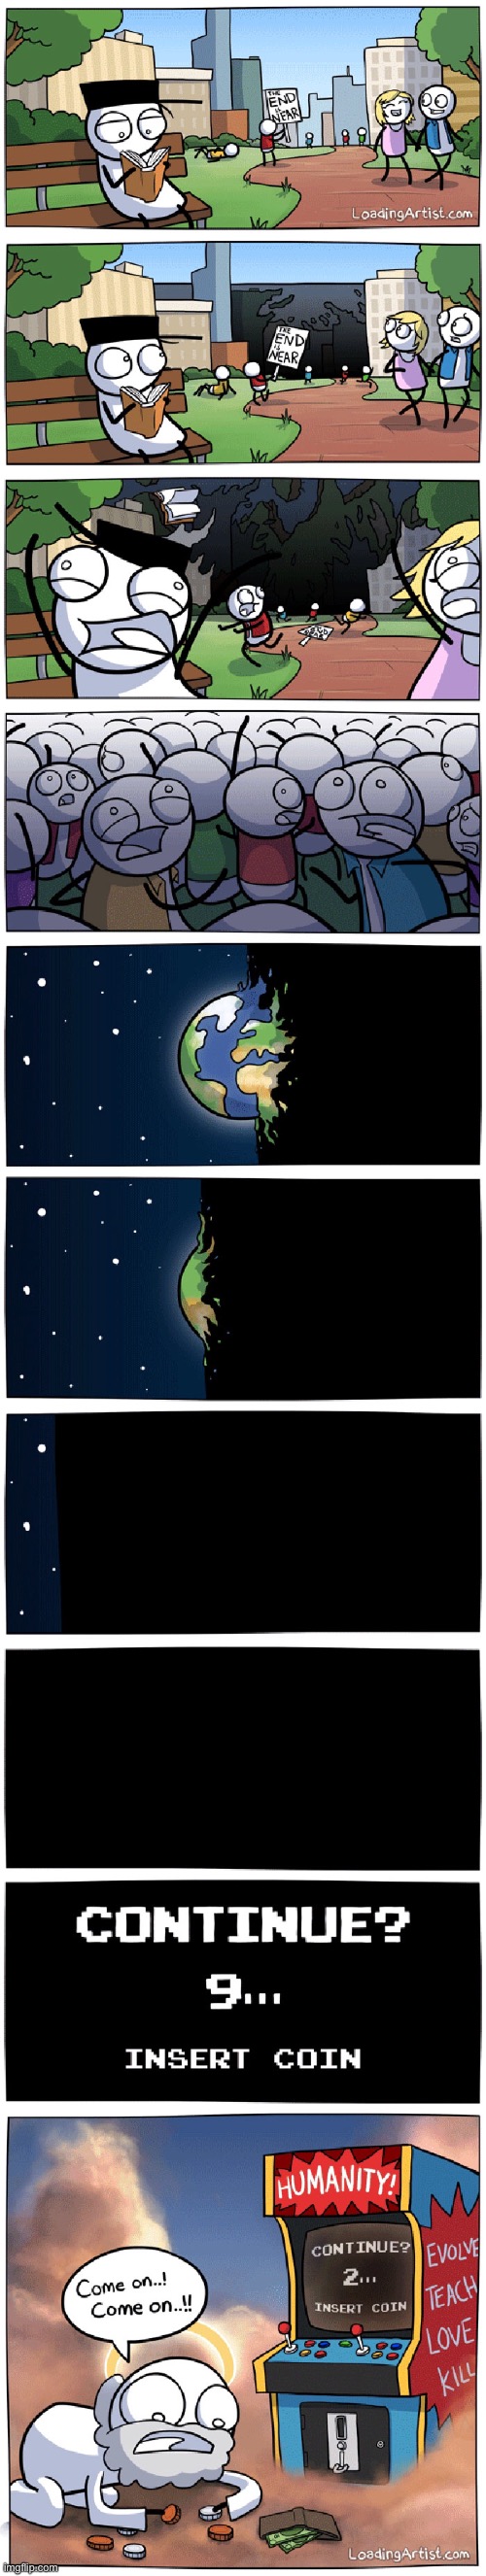 #1505 | image tagged in comics/cartoons,comics,loading,artist,end of the world,arcade | made w/ Imgflip meme maker